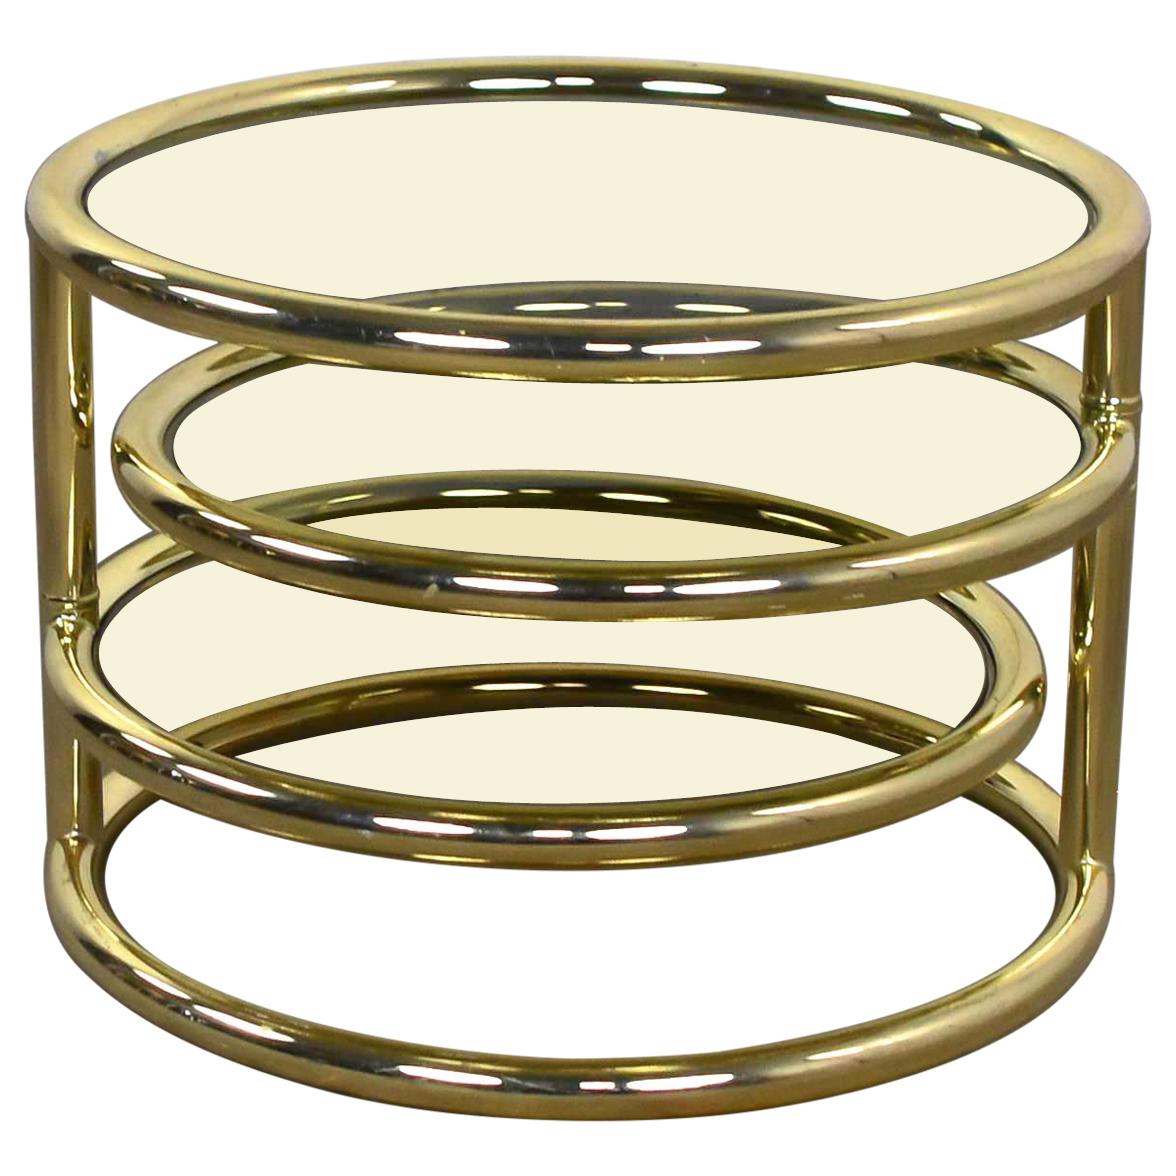 Modern Round Brass & Smoke Glass End Table or Coffee Table with Pivoting Tiers